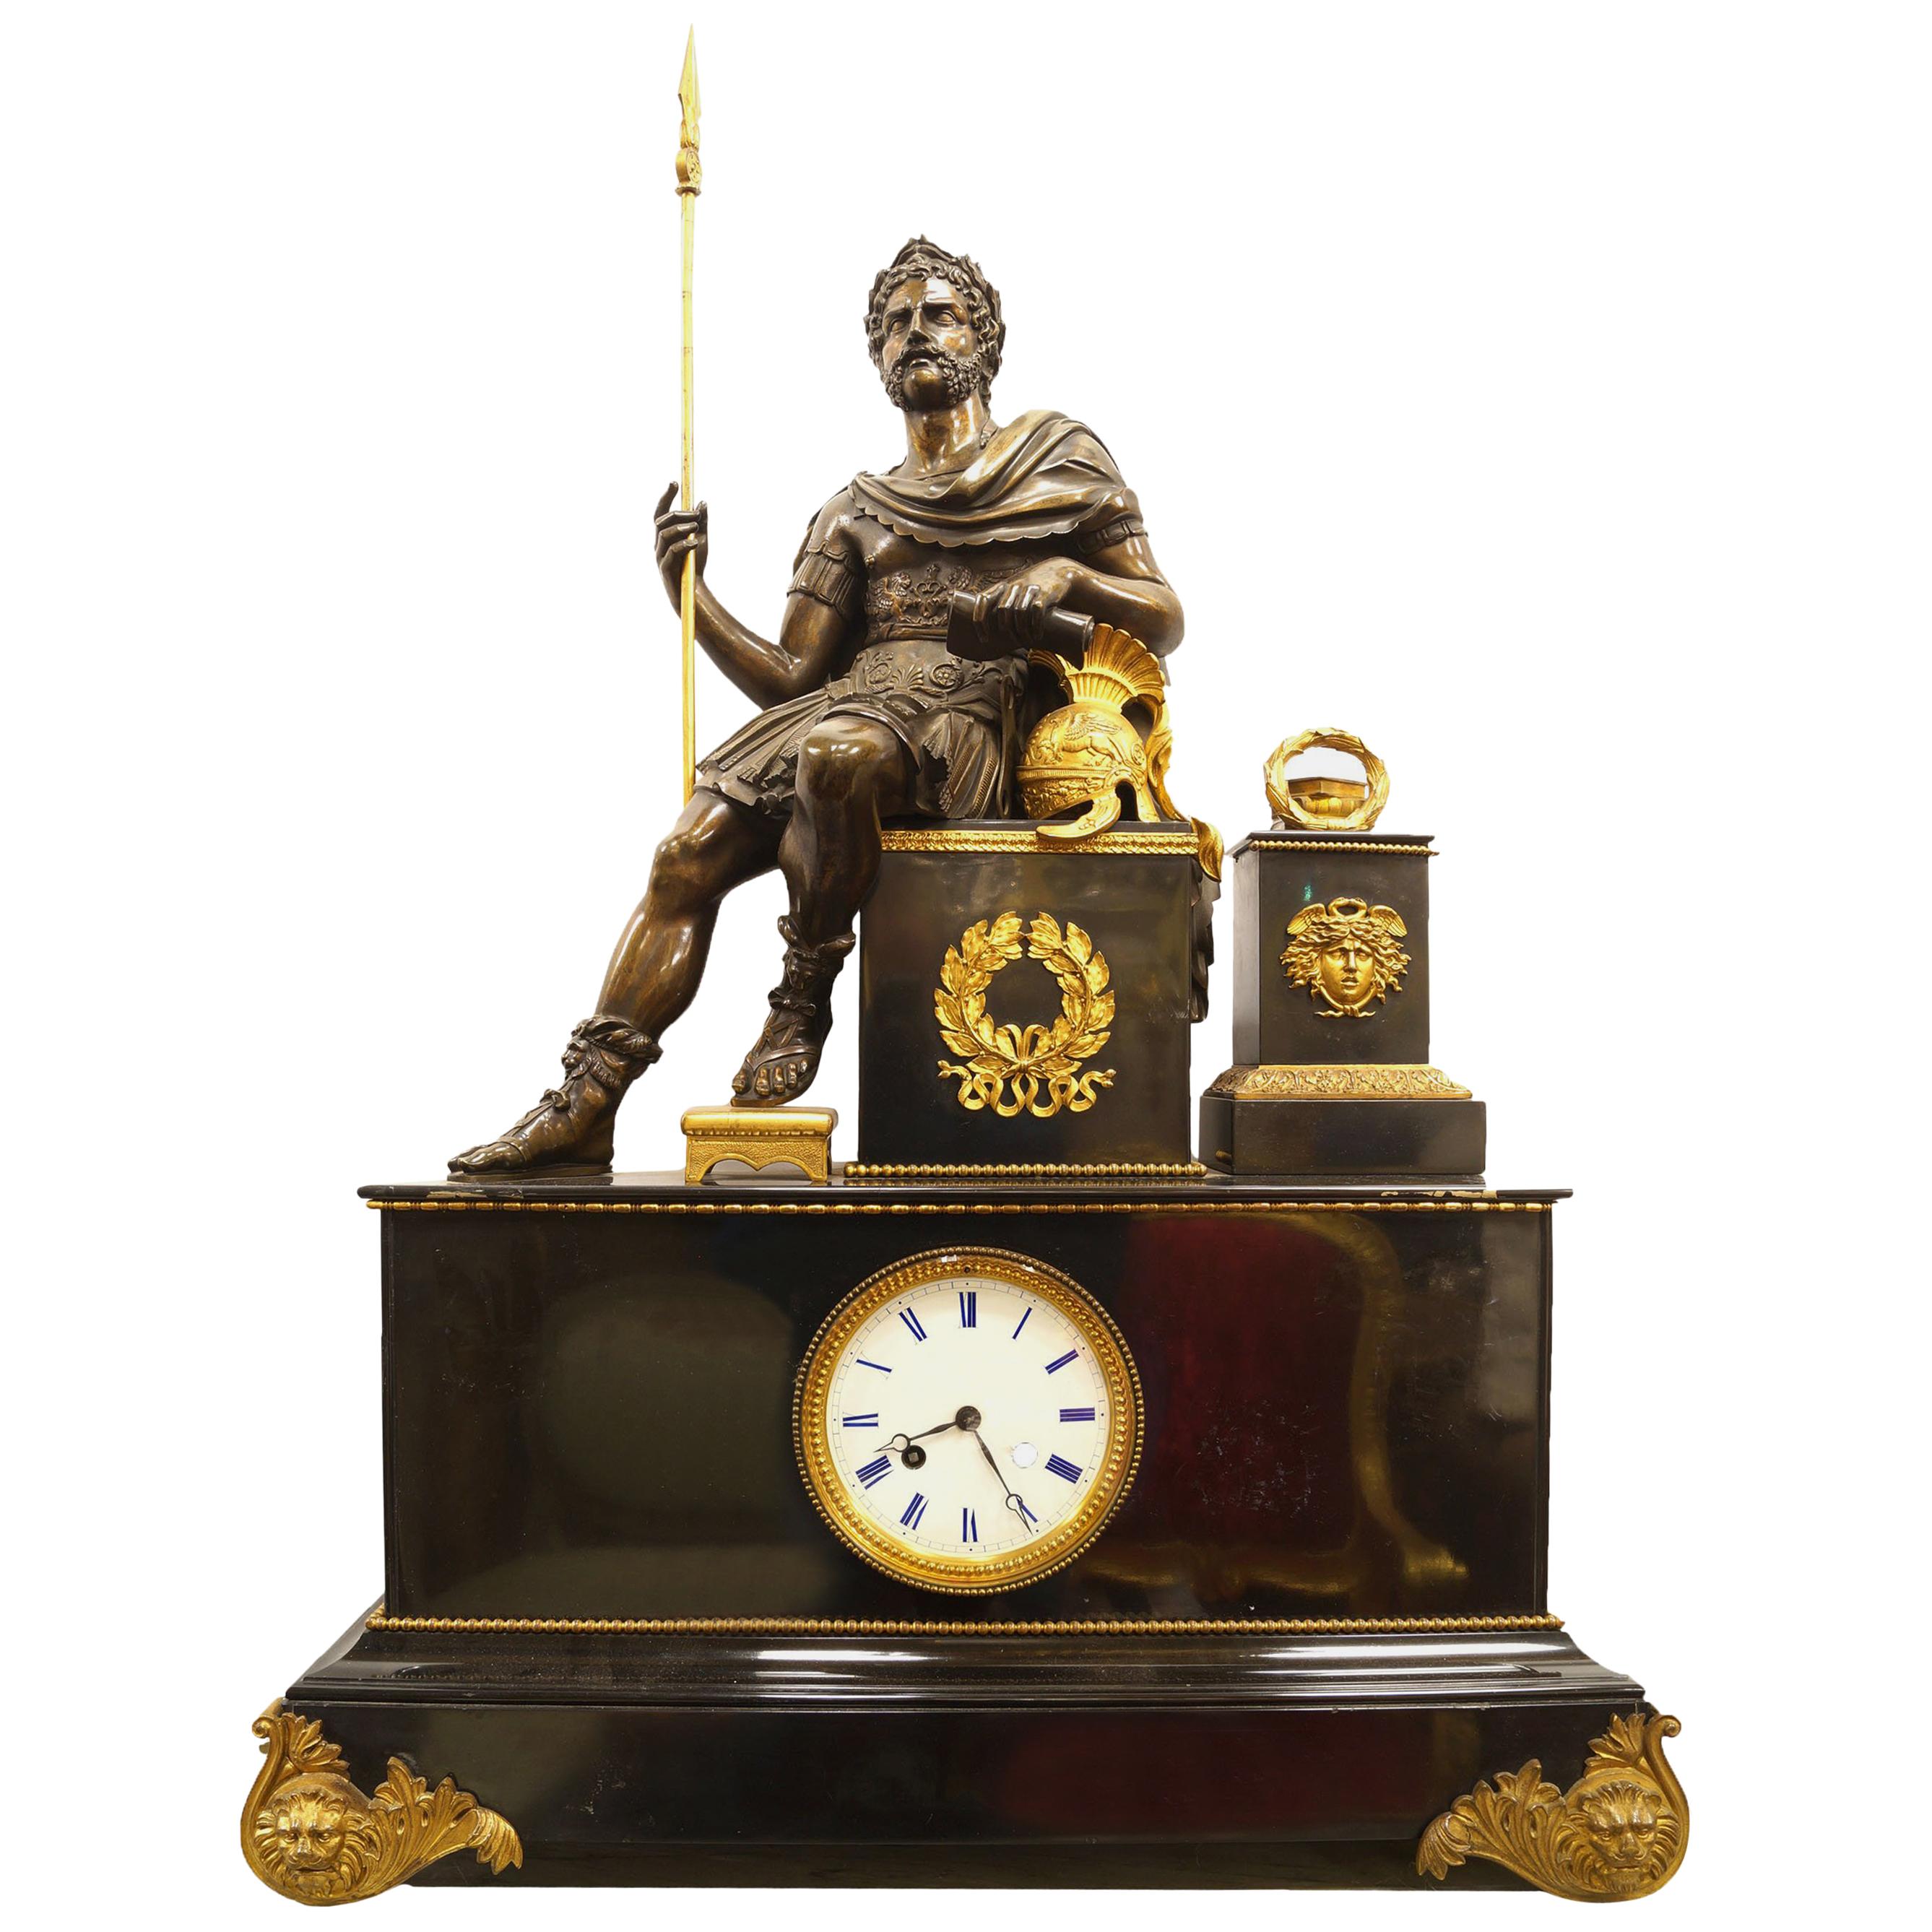 French Empire Style Bronze Figural Mantel Clock with Seated Roman Soldier